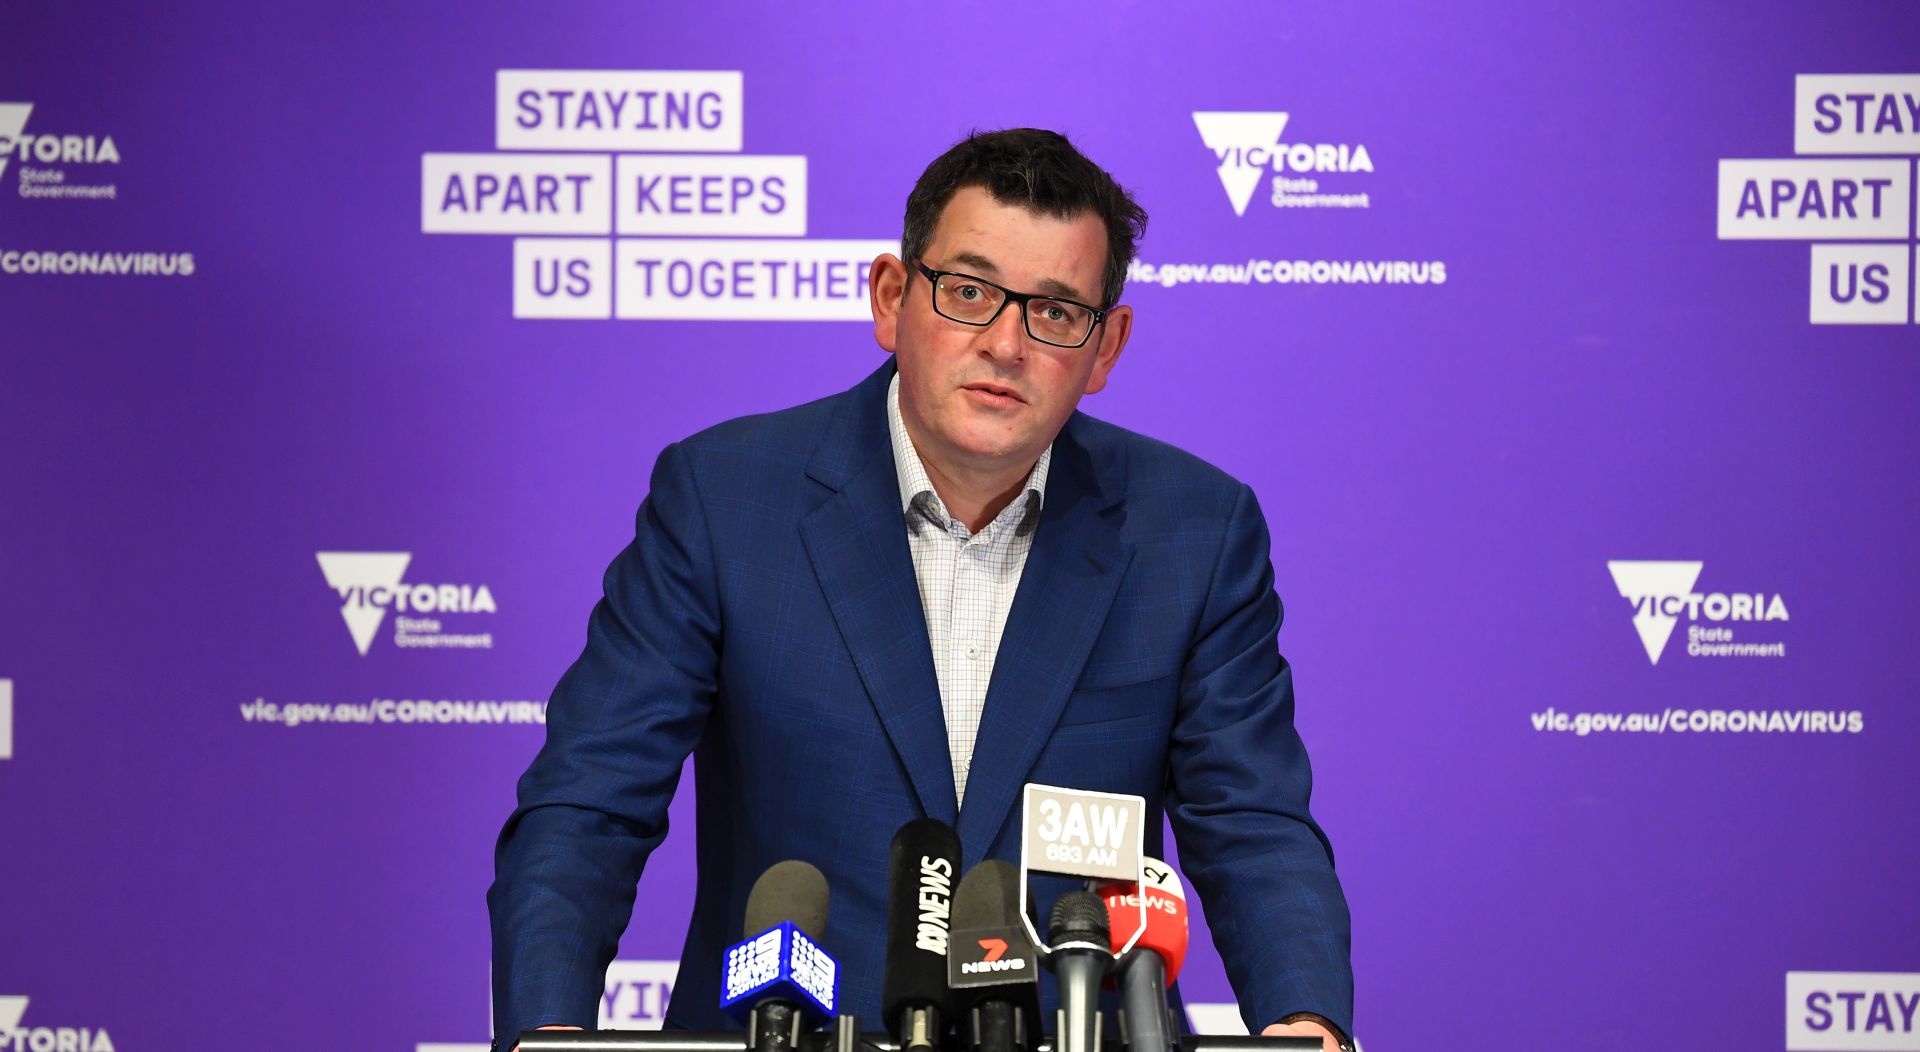 epa08581478 Victorian Premier Daniel Andrews addresses the media during a press conference in Melbourne, Victoria, Australia, 03 August 2020. Andrews announced new COVID-19 workplace restrictions. The Australian state of Victoria is under new lockdown measures after a surge in coronavirus disease (COVID-19) infections, with Melbourne residents subject to a night-time curfew.  EPA/JAMES ROSS AUSTRALIA AND NEW ZEALAND OUT